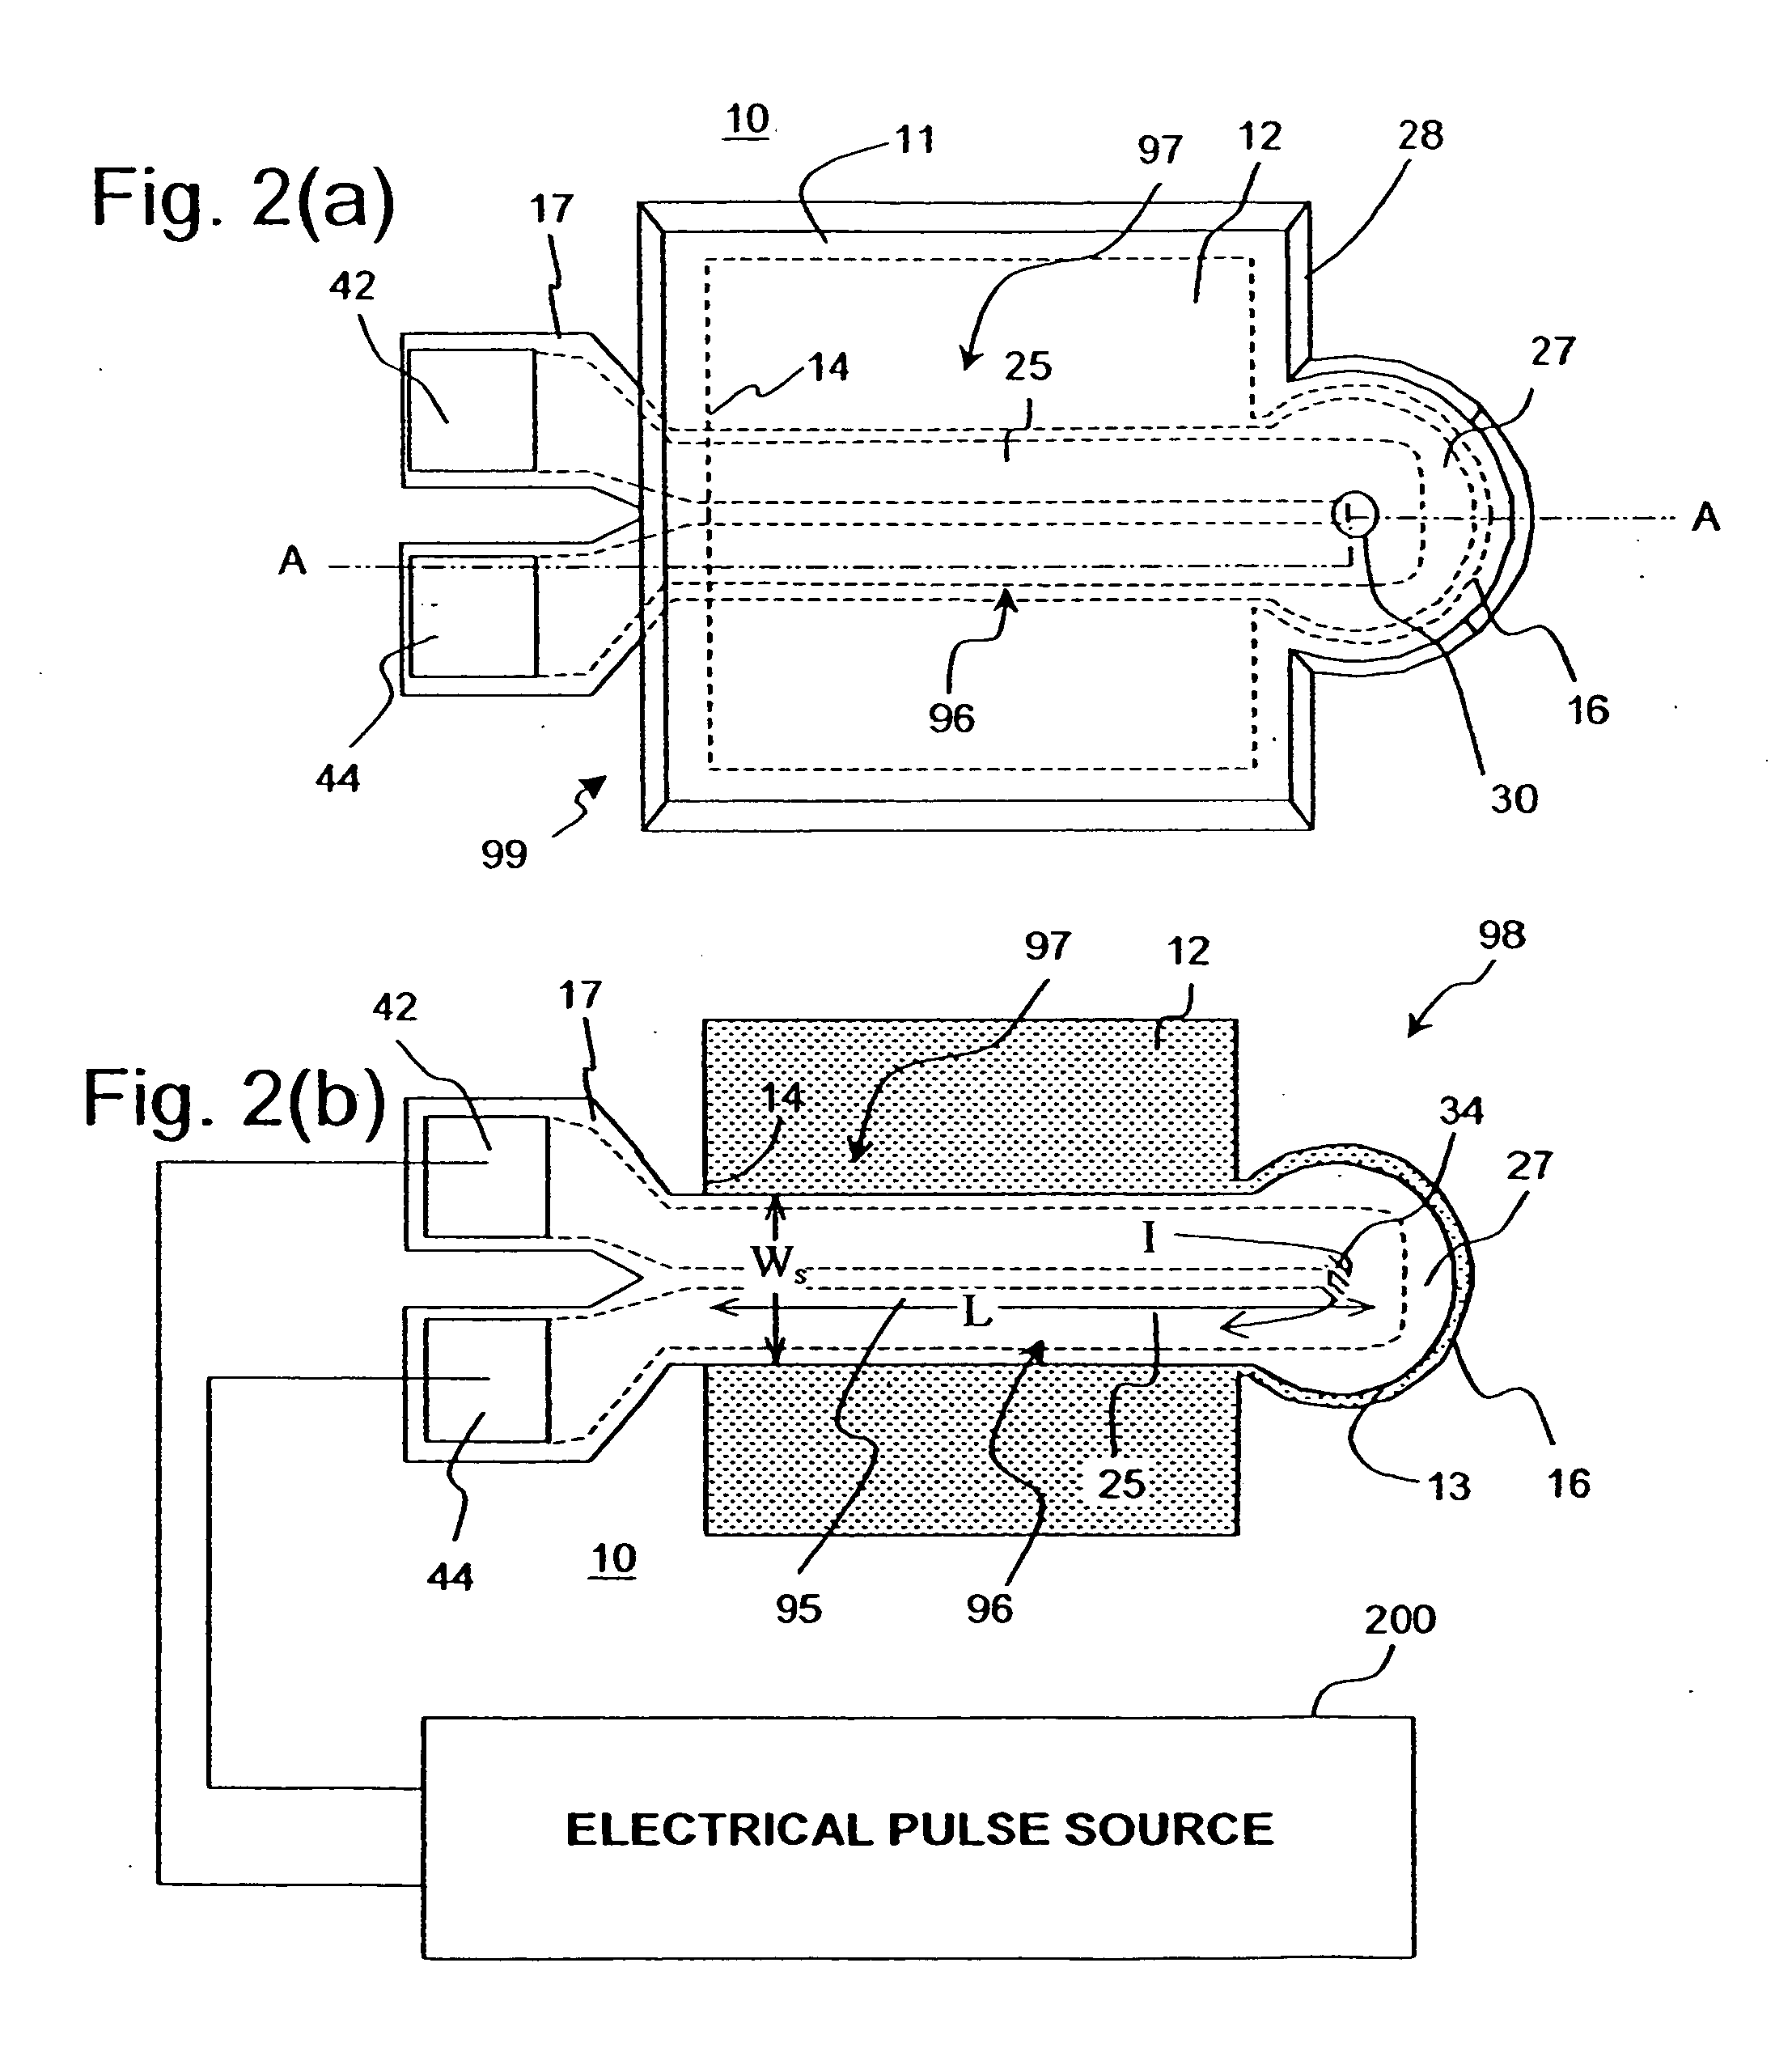 Liquid drop emitter with split thermo-mechanical actuator